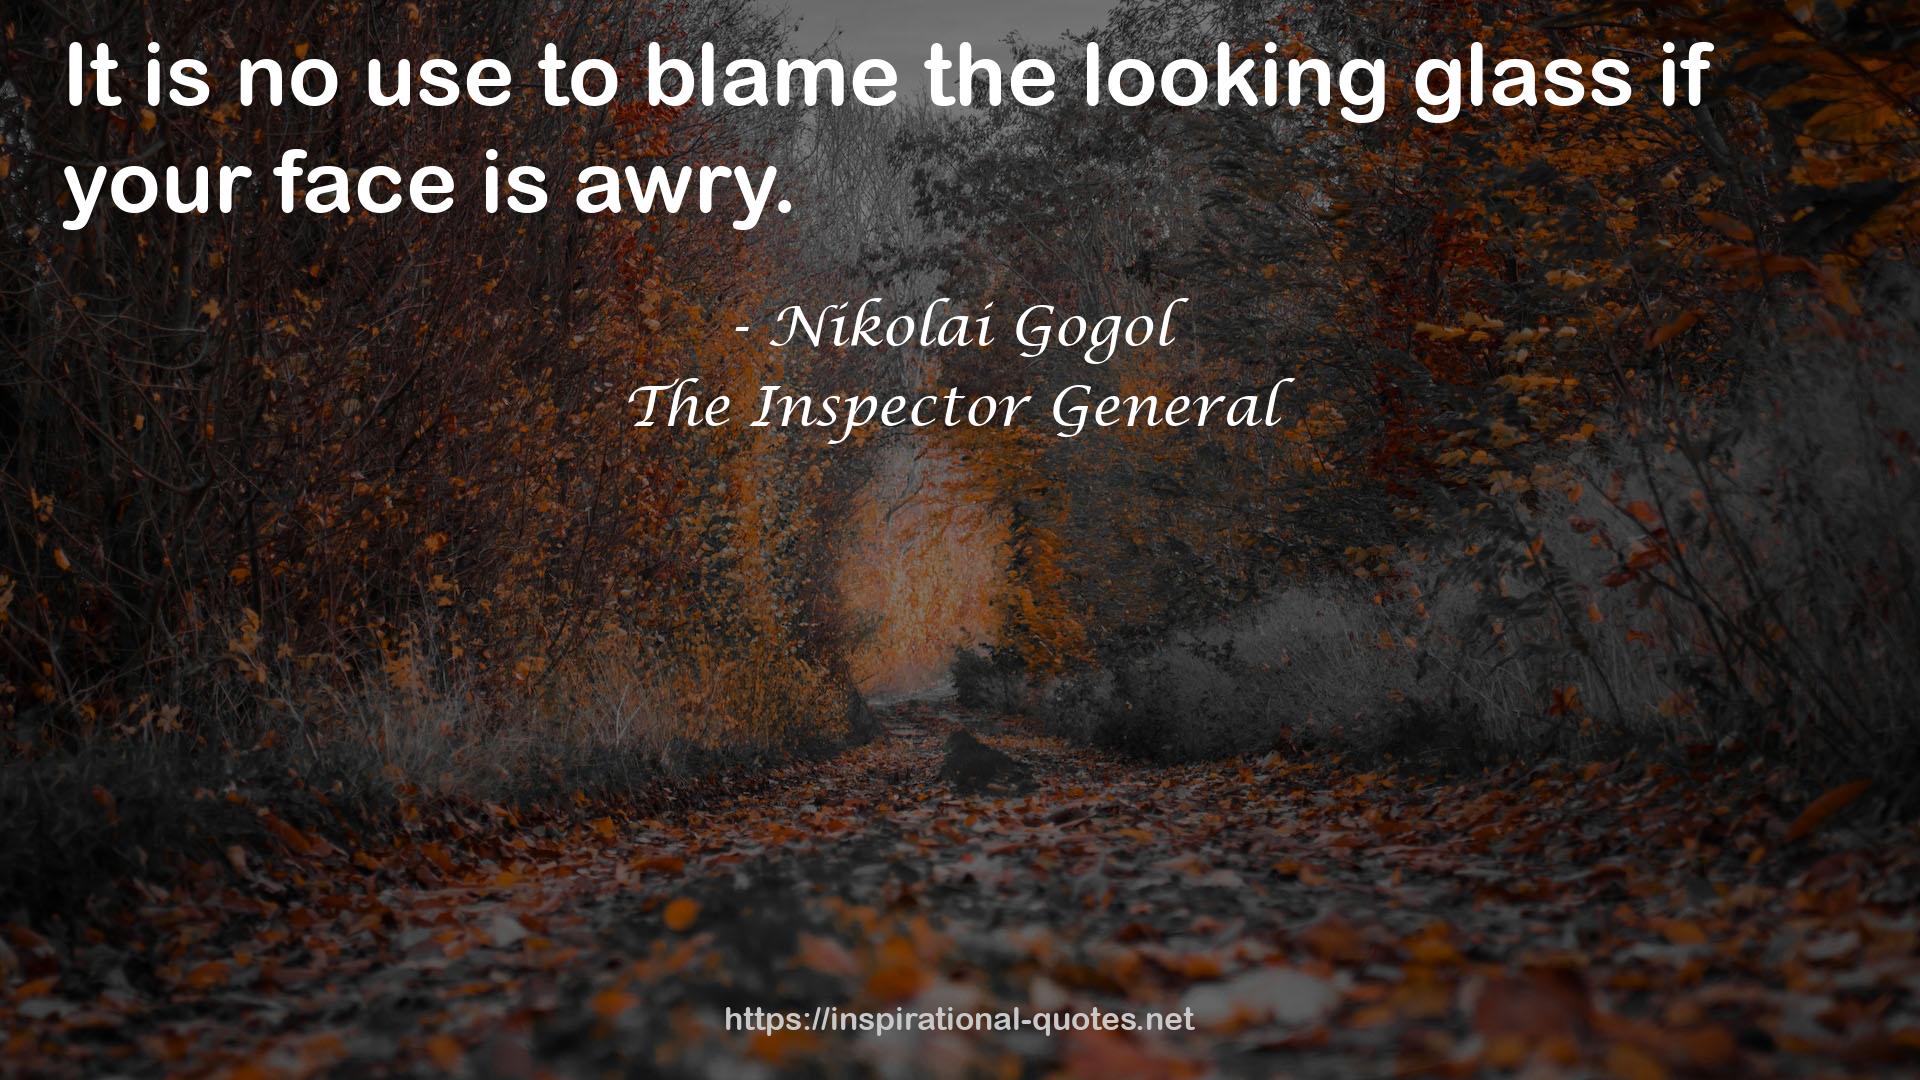 The Inspector General QUOTES